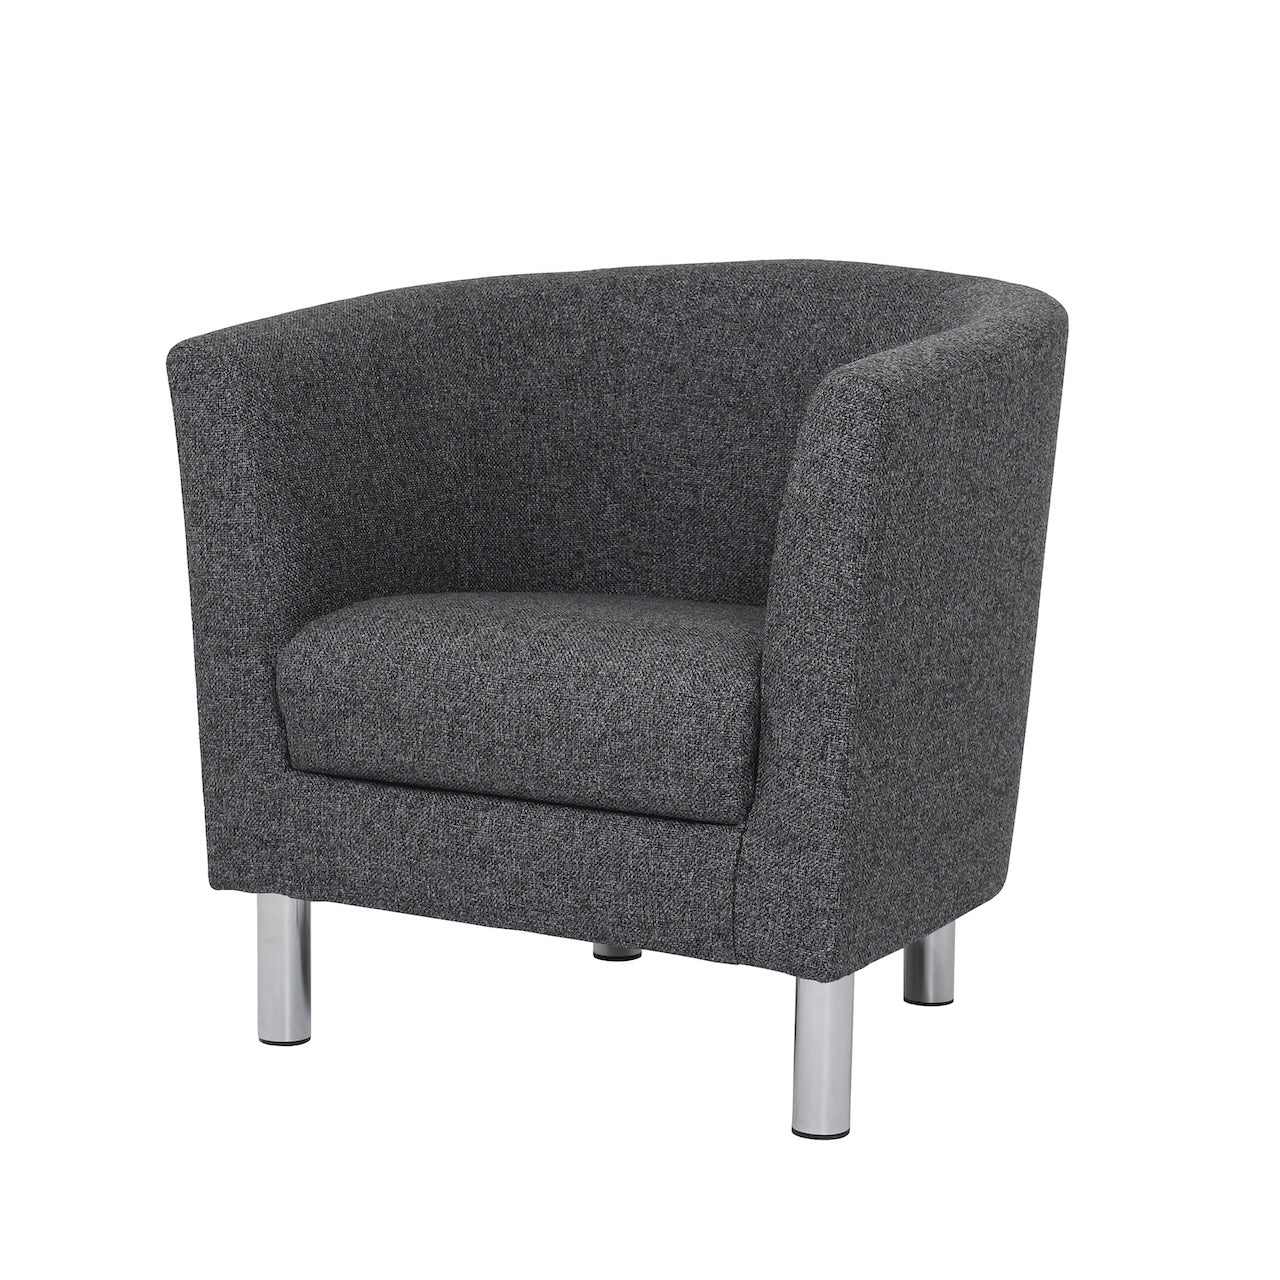 Furniture To Go Cleveland Armchair in Nova Anthracite